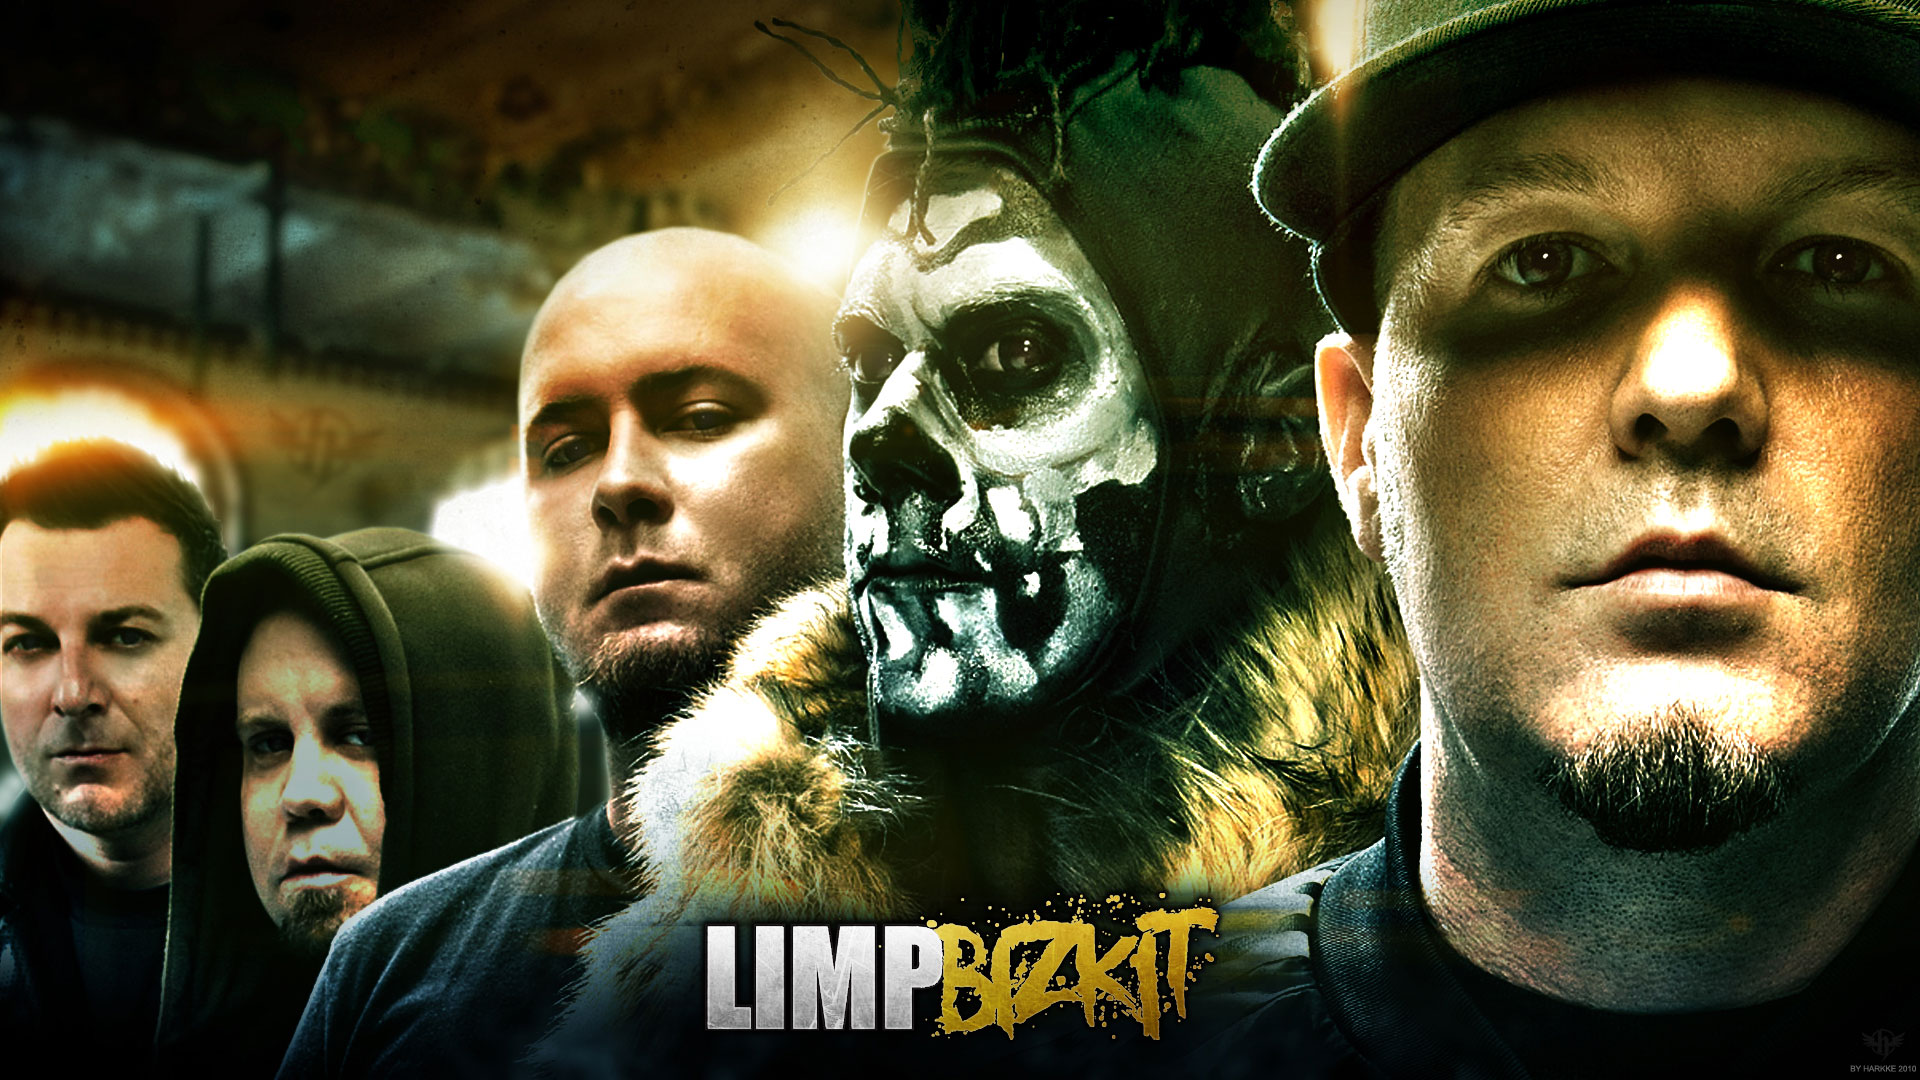 The channel limp bizkit mp3 torrent used lego rock band wii torrent